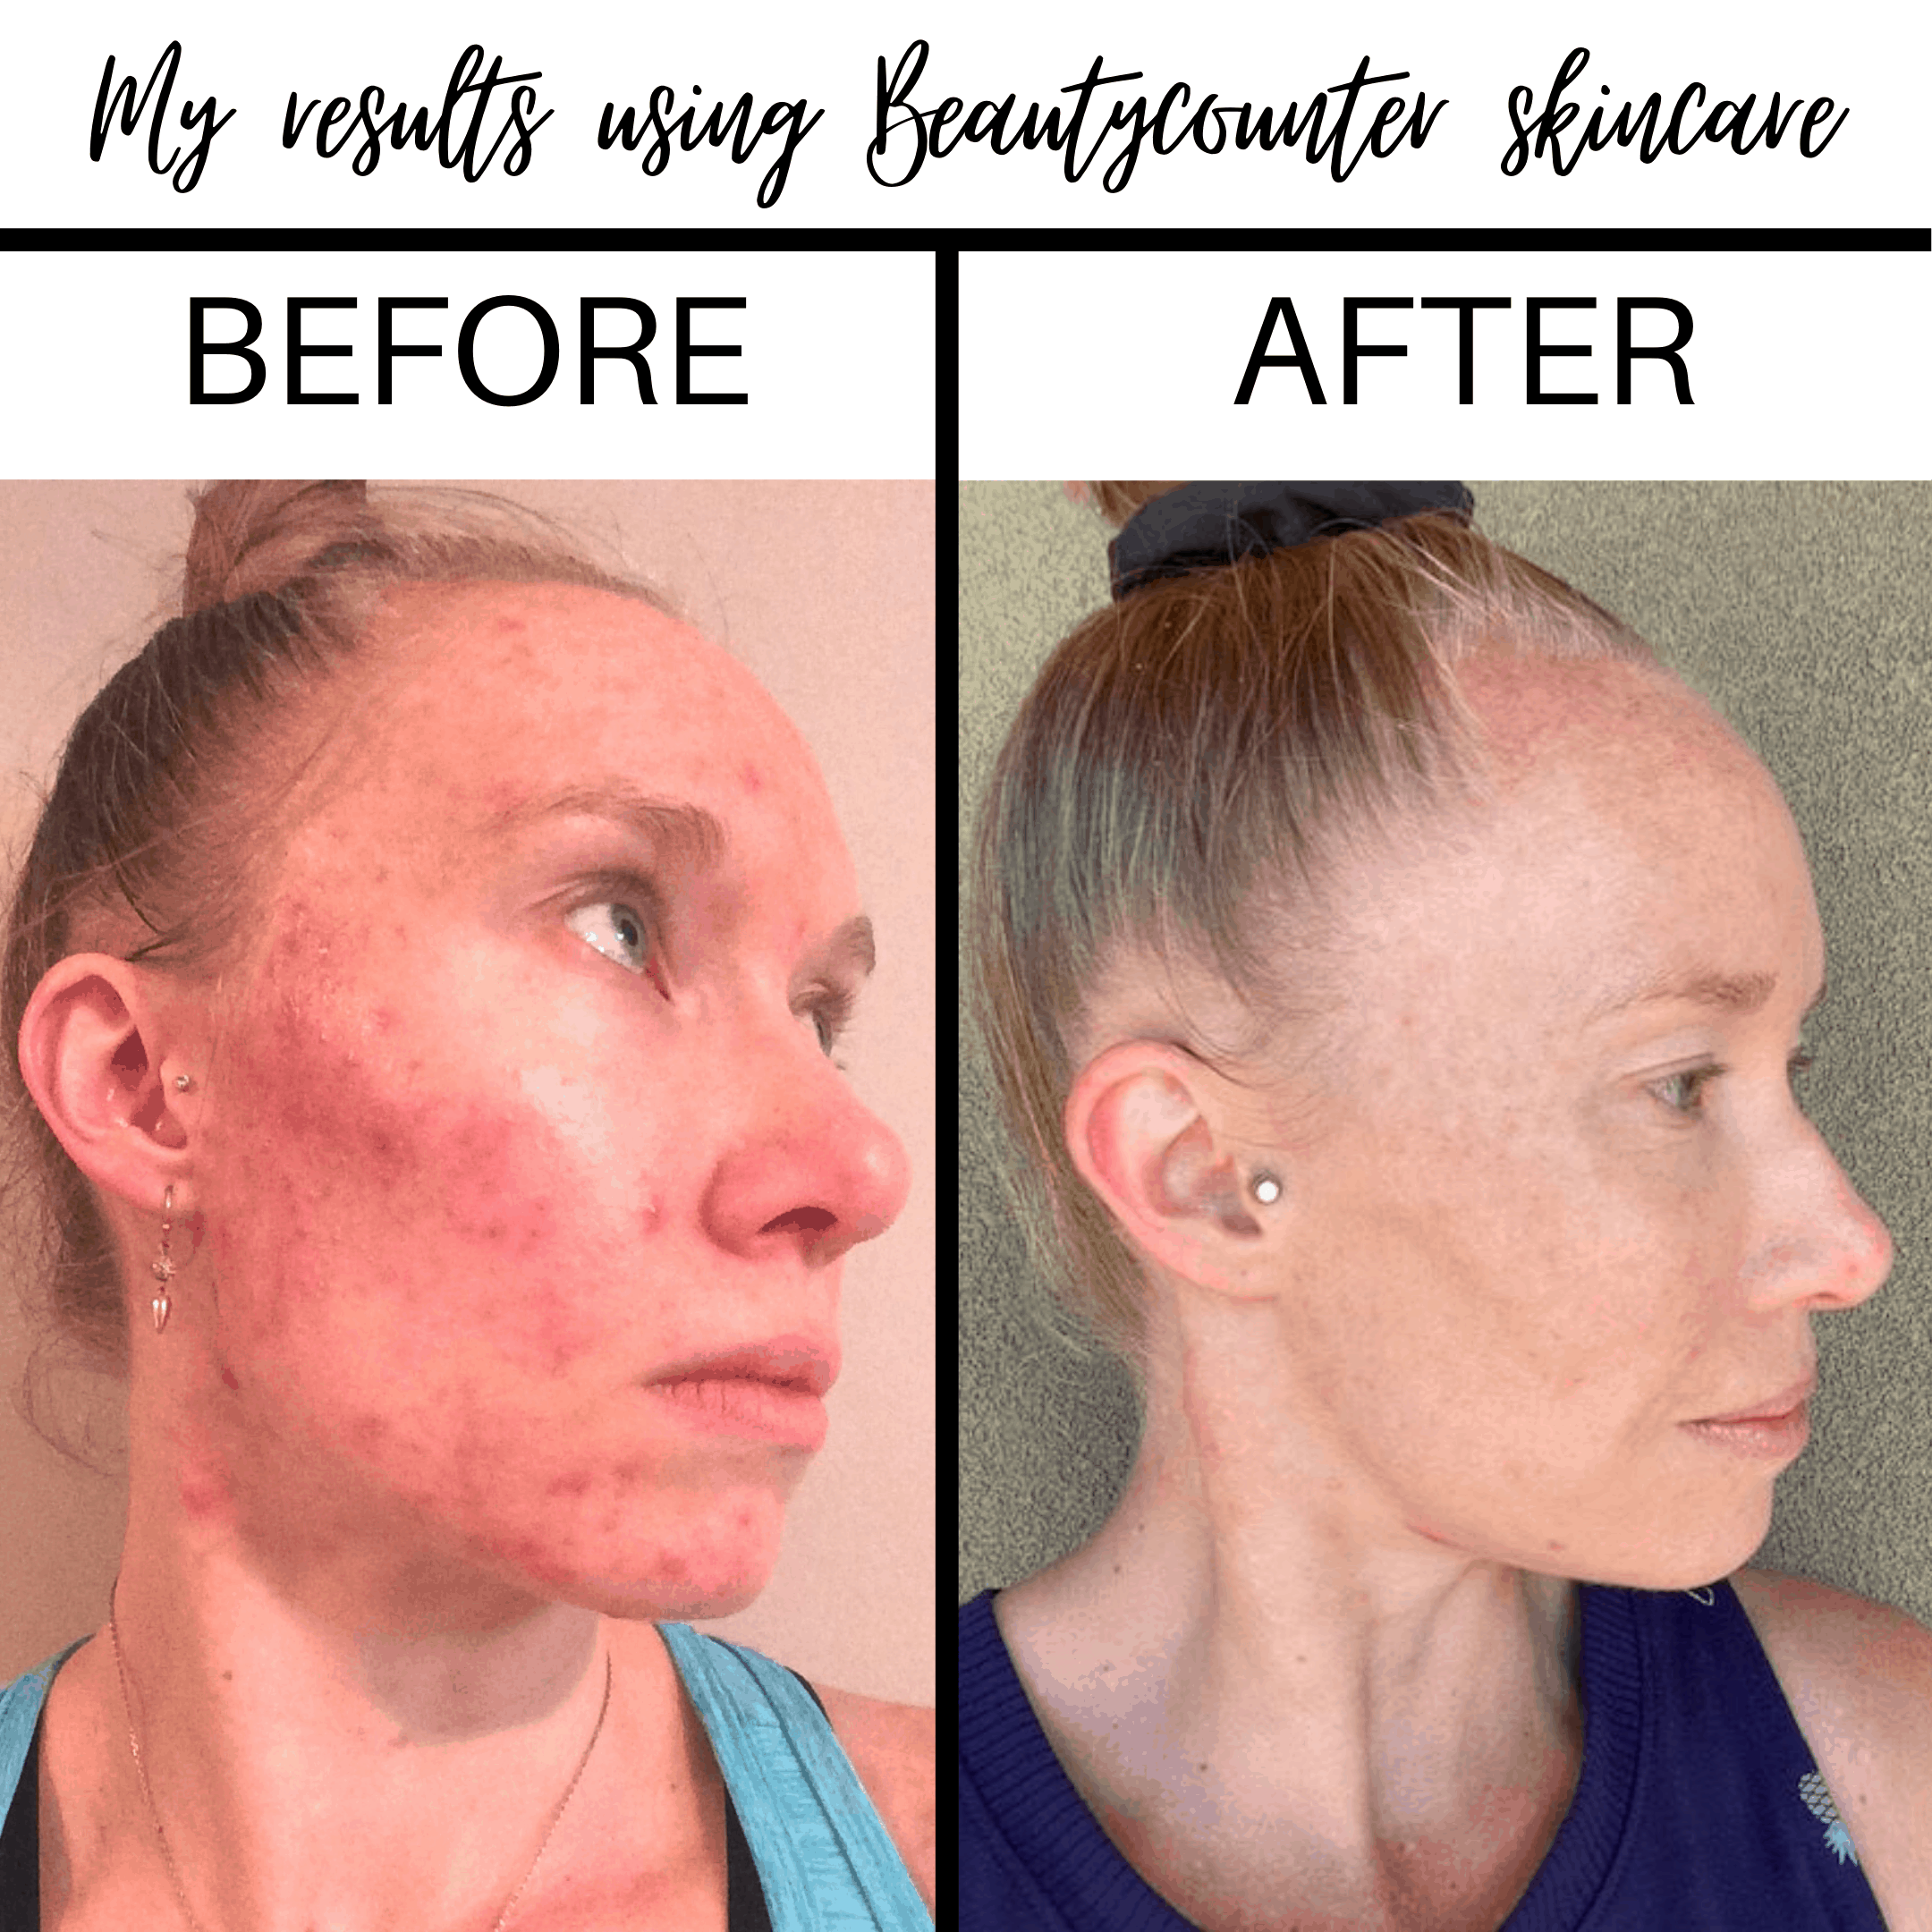 Before and after photos of using Beautycounter products for acne.